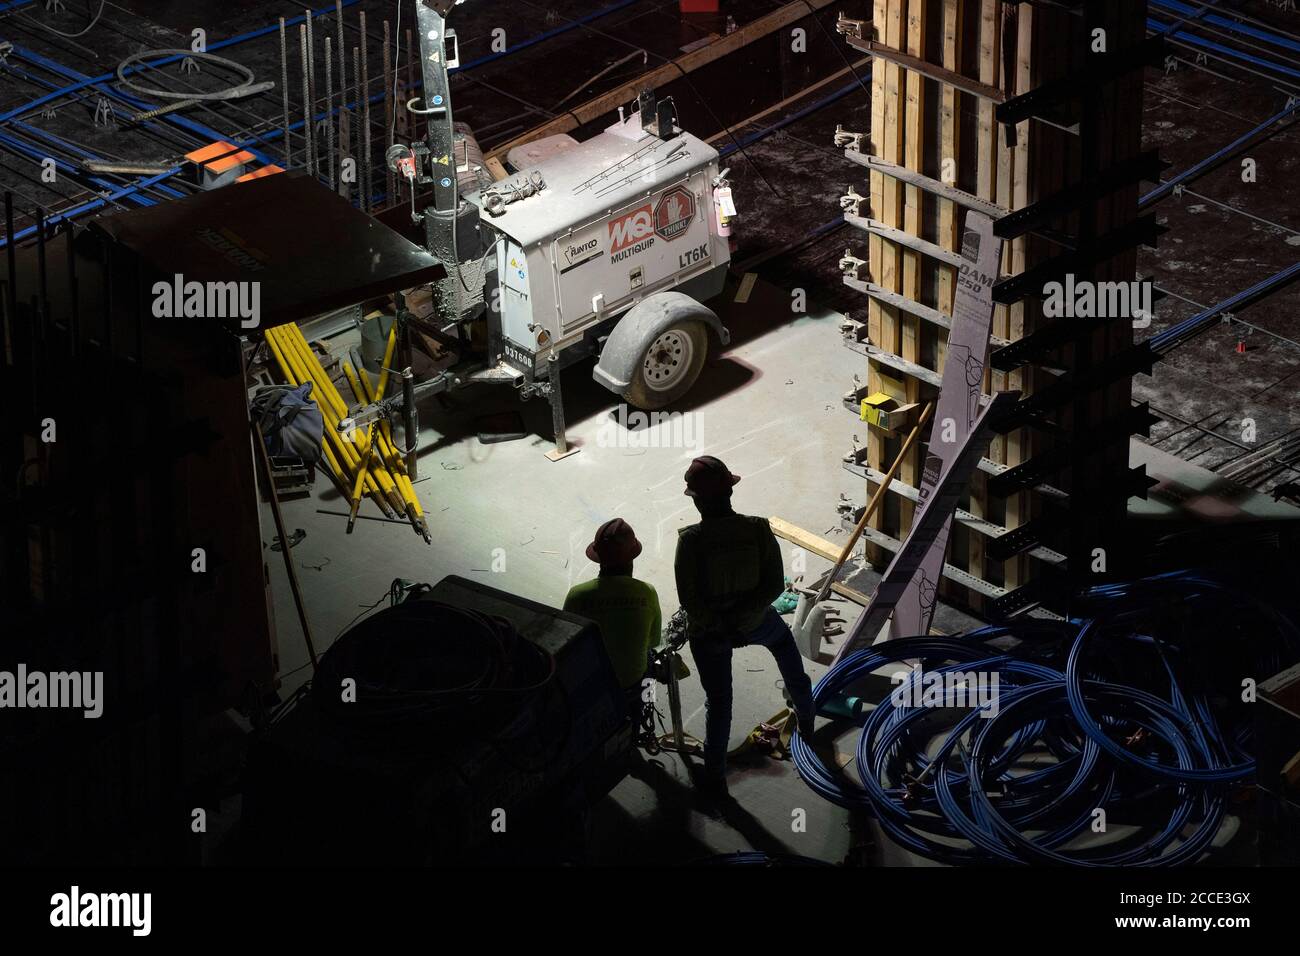 Austin, TX USA July 25, 2020: A generator-powered spotlight shines on concrete crews working on the parking garage of a 53-story building during a night-time pour in downtown Austin, TX. Huge construction projects continue unabated in Texas despite the nationwide COVID-19 pandemic and the state stricken with over a half million cases and 10,000-plus deaths. Stock Photo